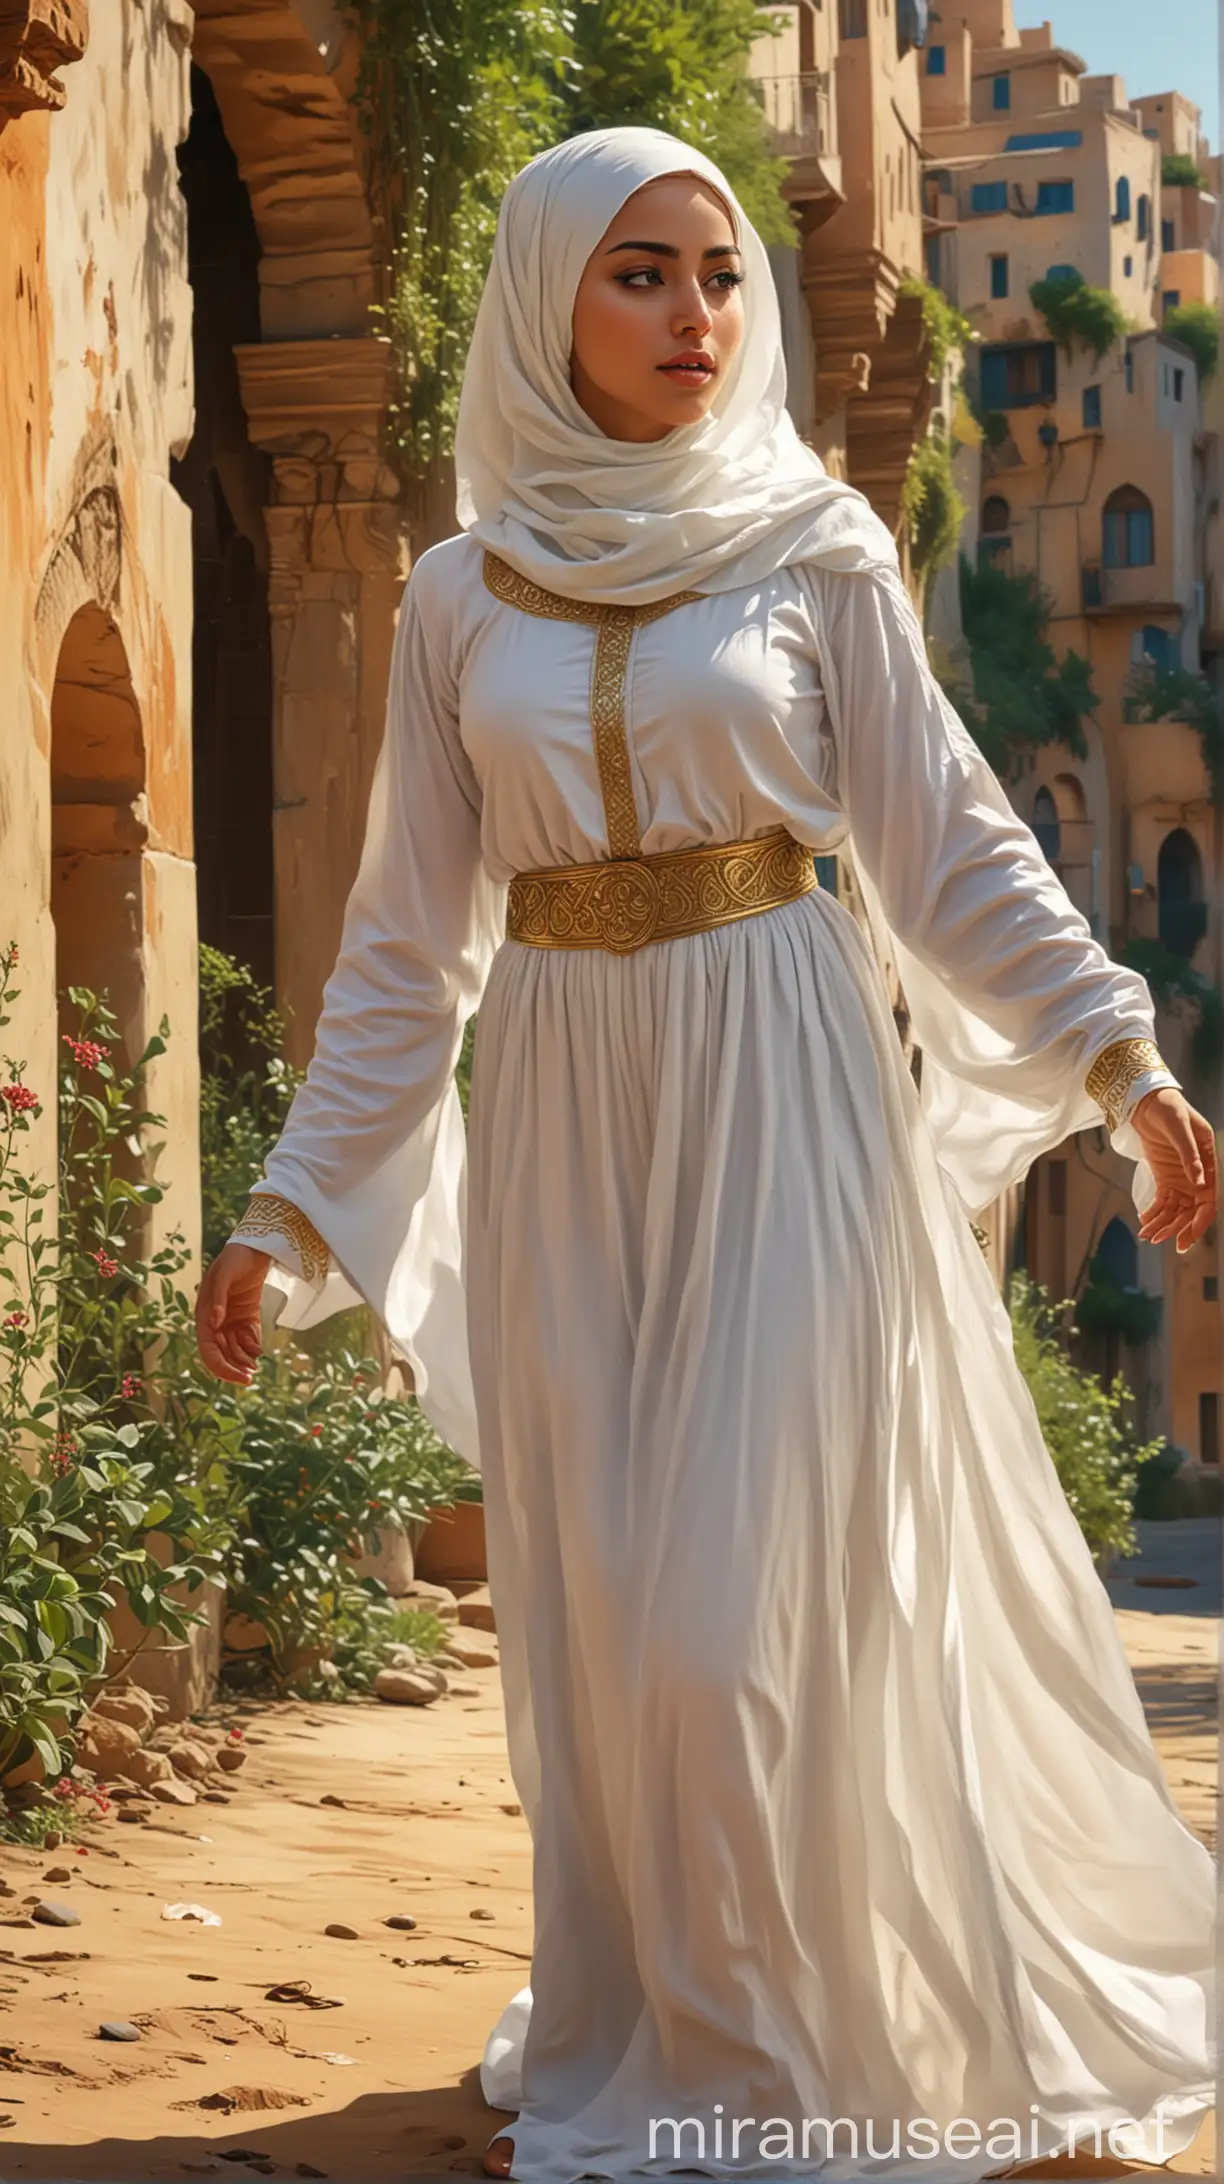 Graceful Arab Woman in White Hijab Standing Amid Vibrant Surroundings